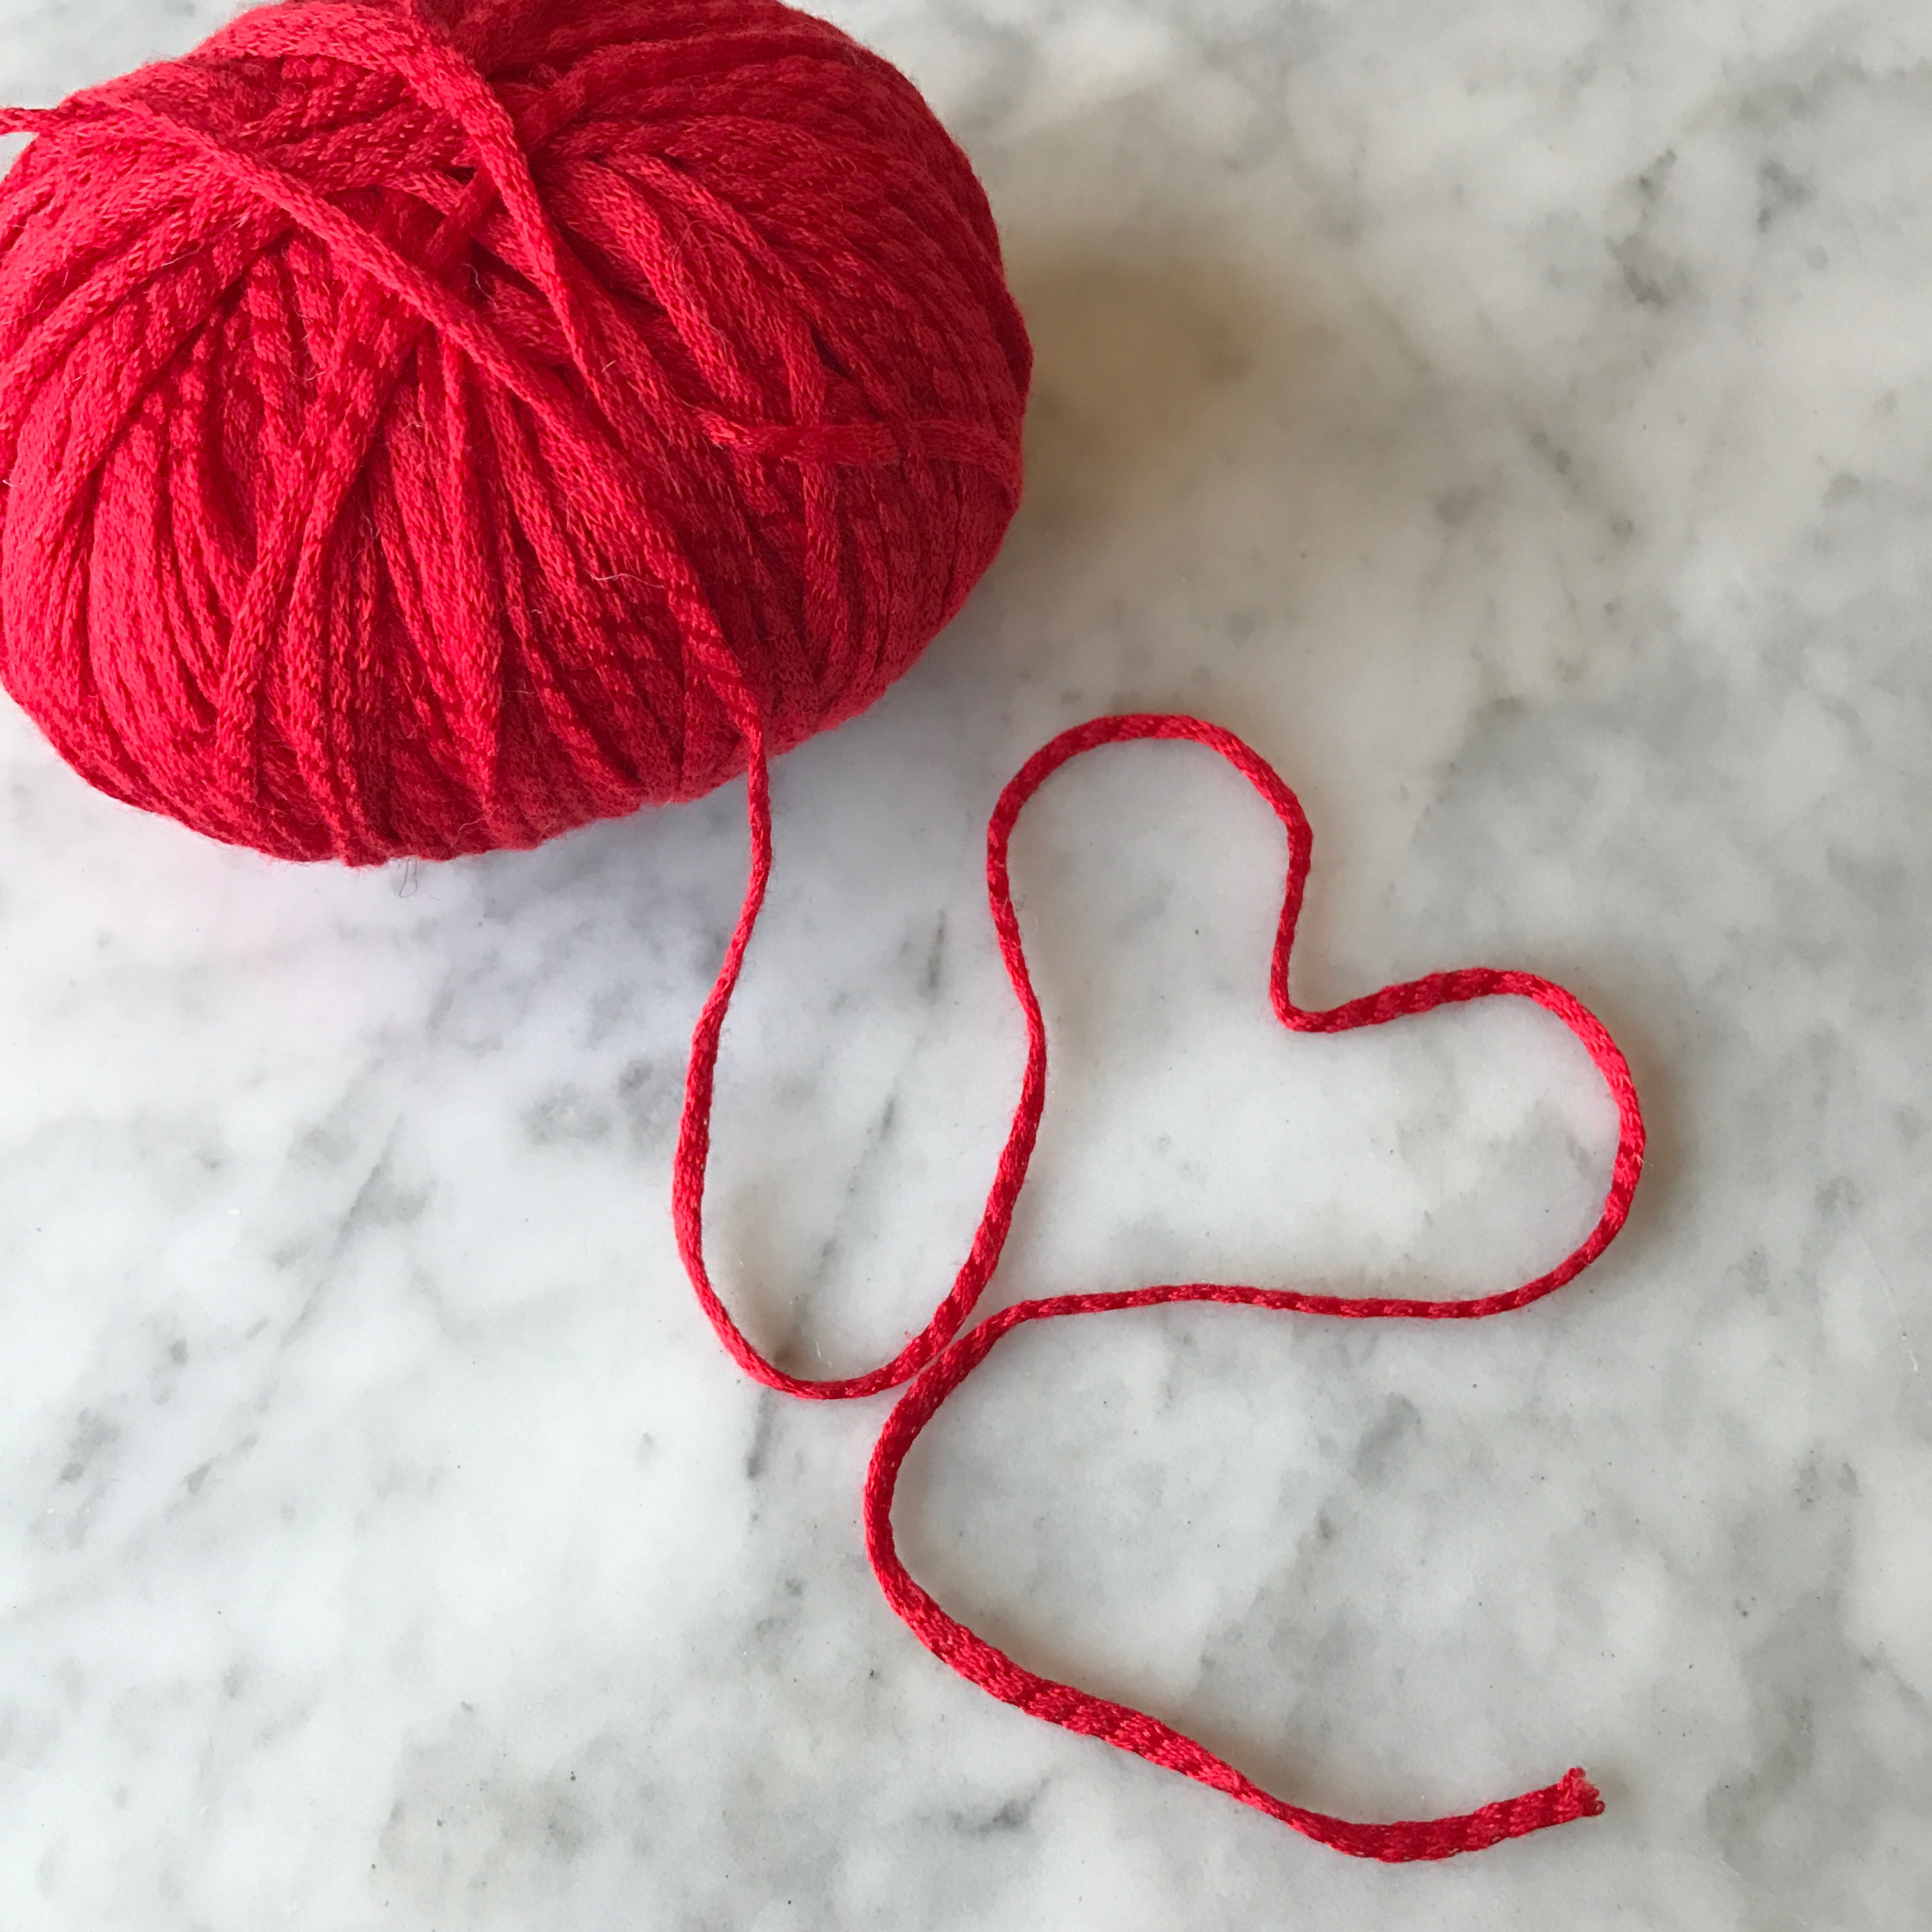 Just Crafty Enough – More Yarn Love Challenge